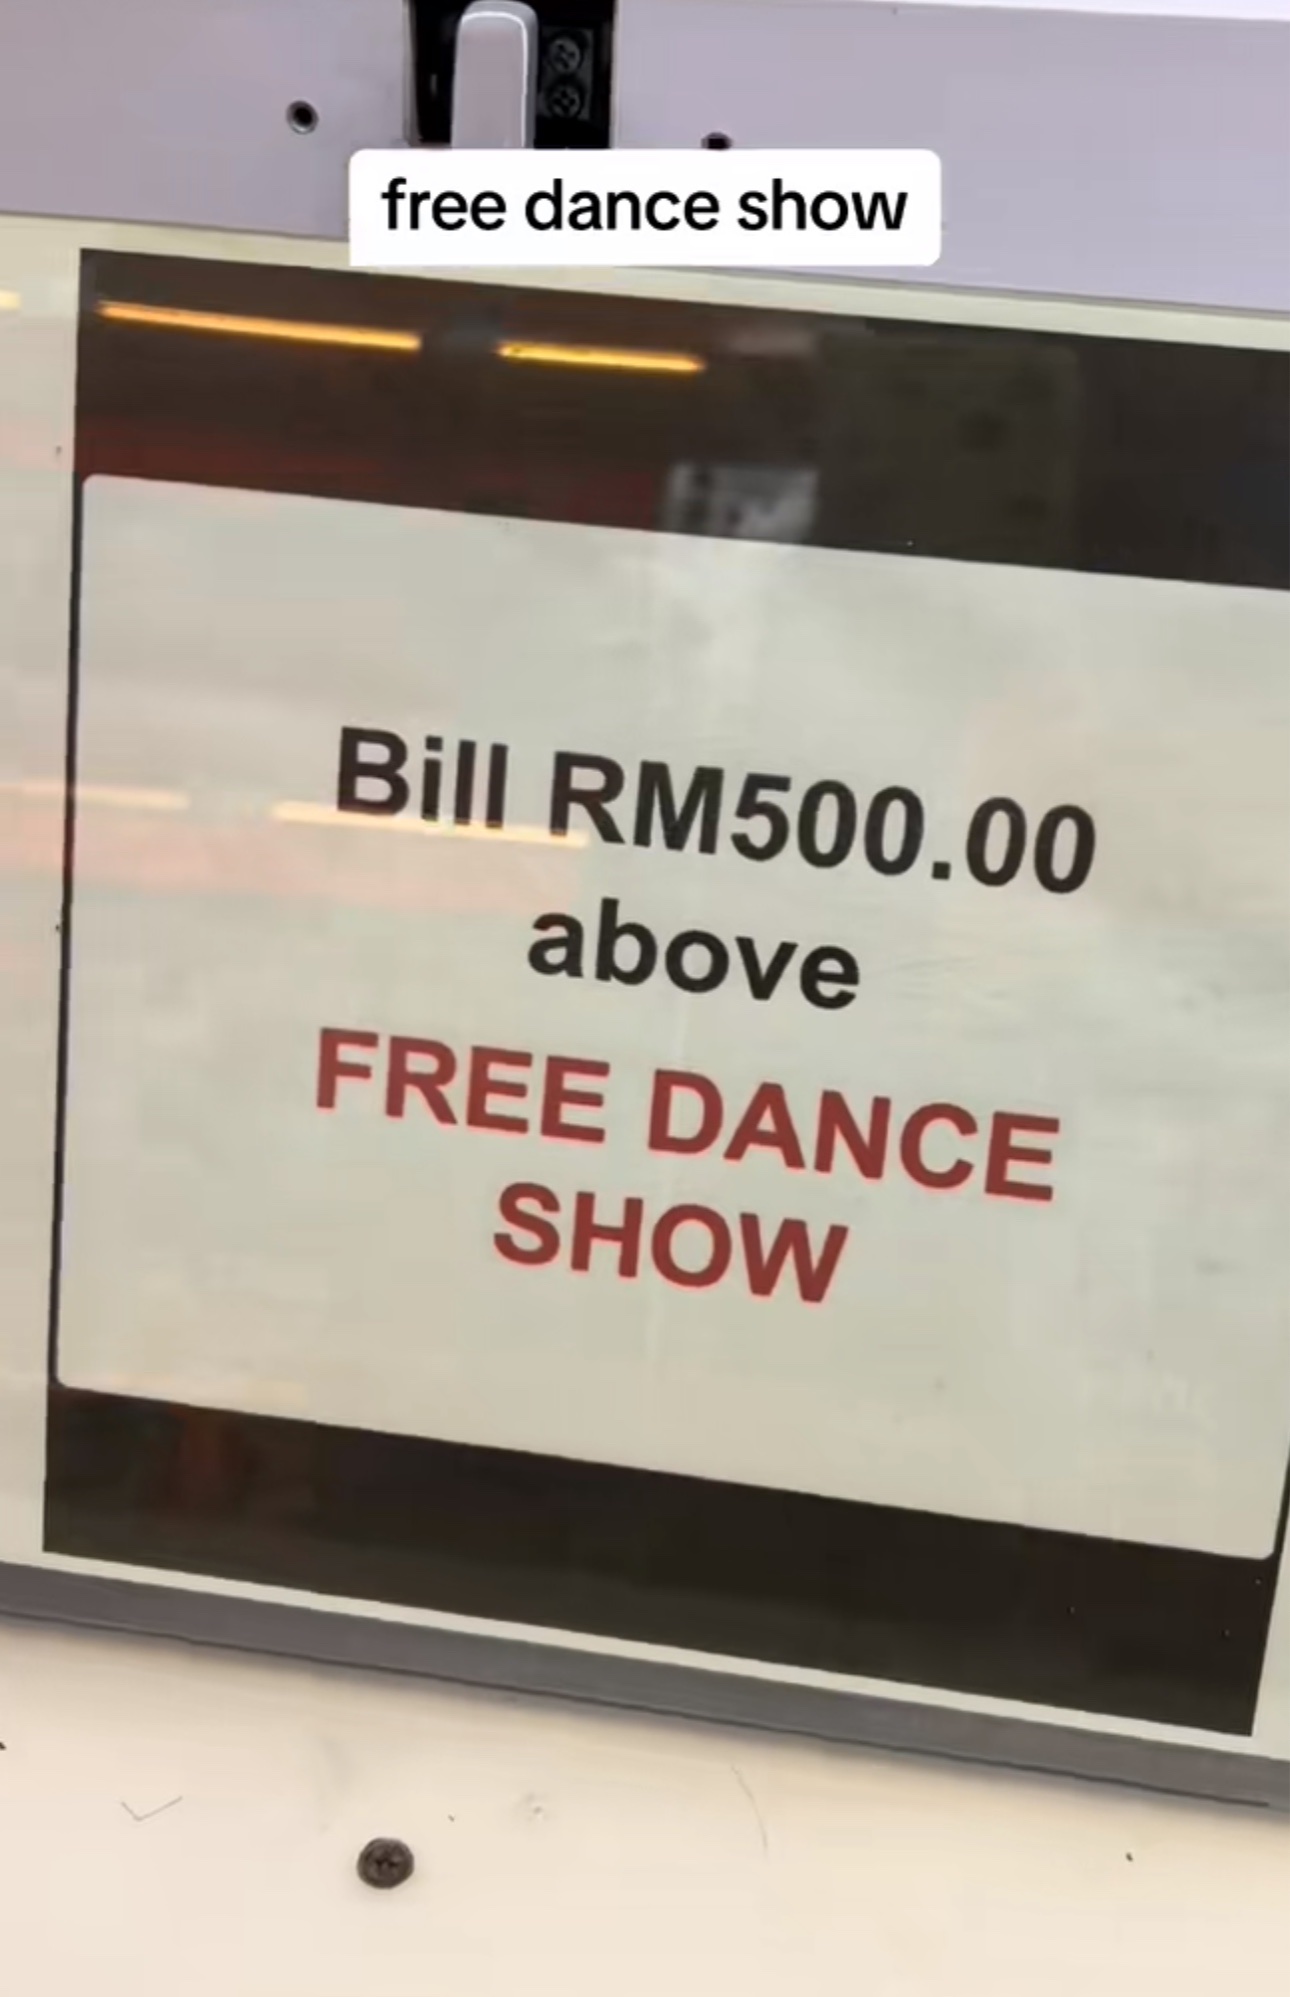 Display showing free dance show available after purchasing rm500 or more